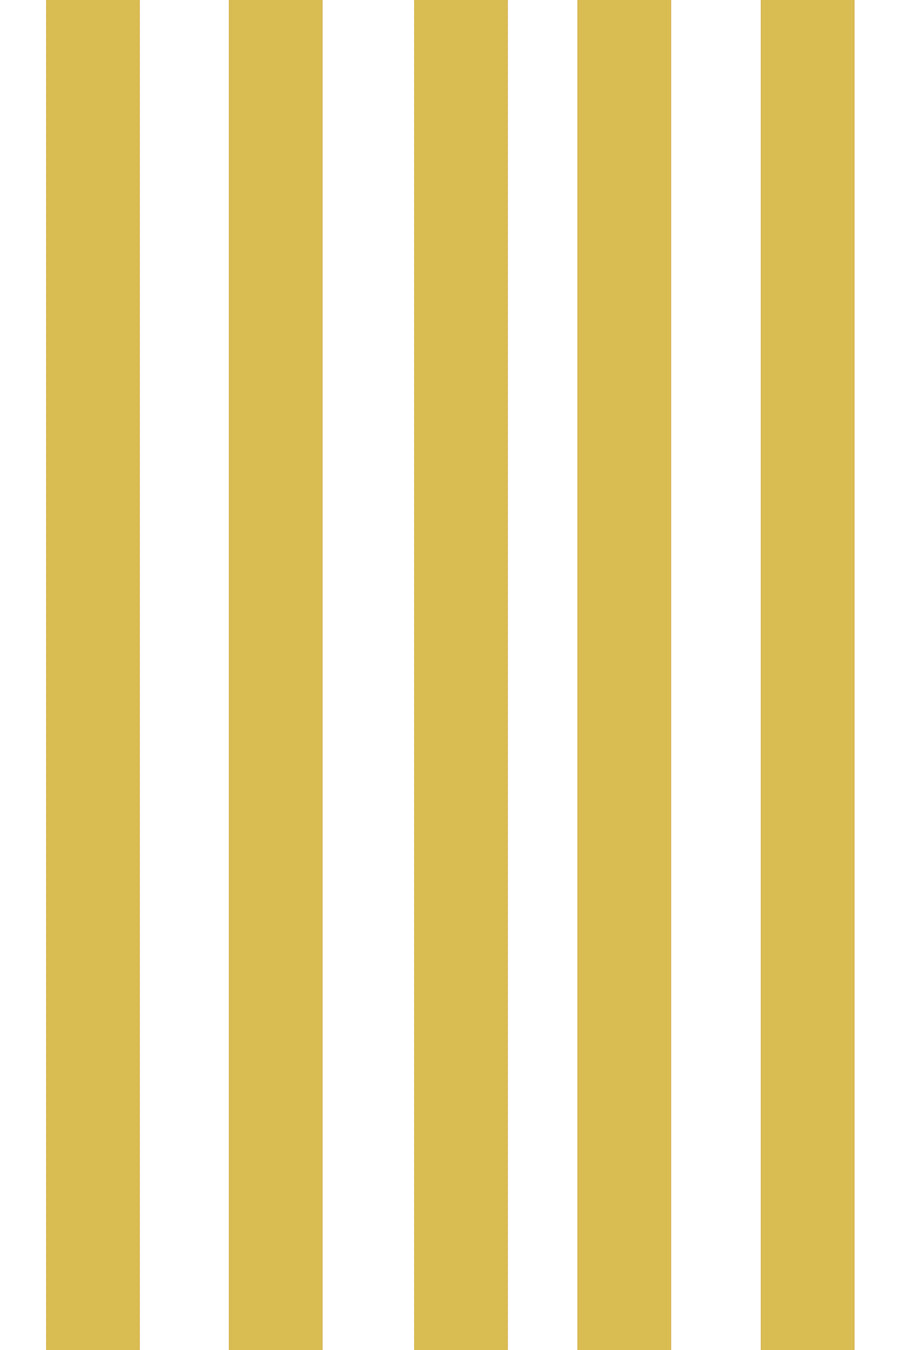 Woolf With Me Fitted Crib Sheet Stripes color_mustard